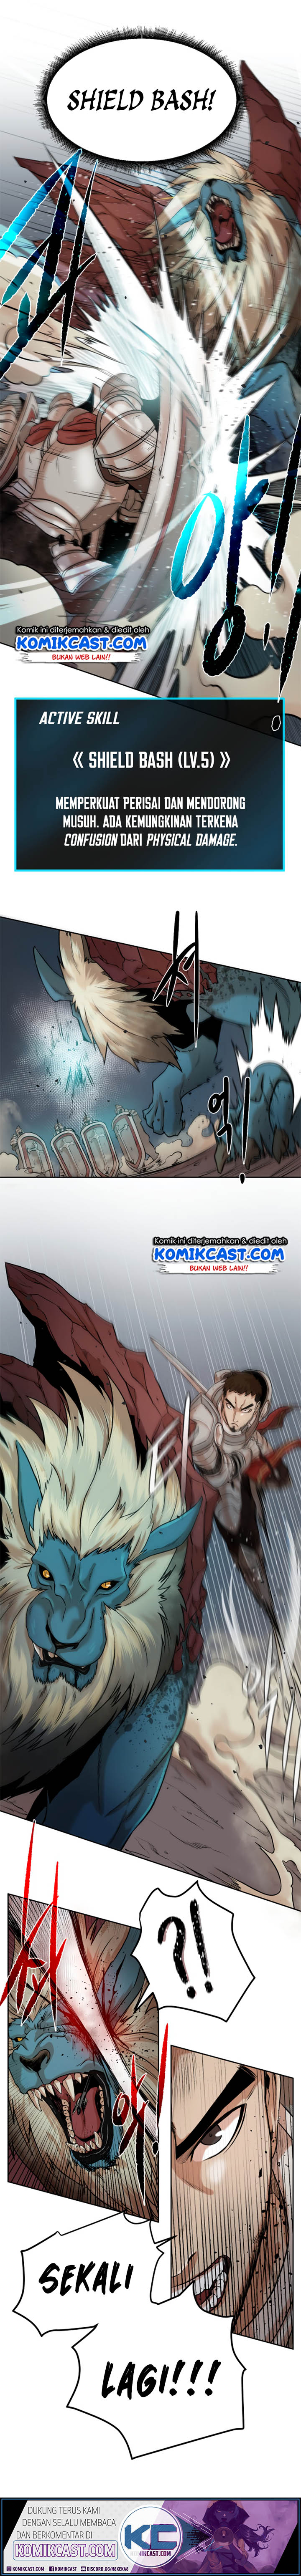 Dungeon and Artifact Chapter 01 20